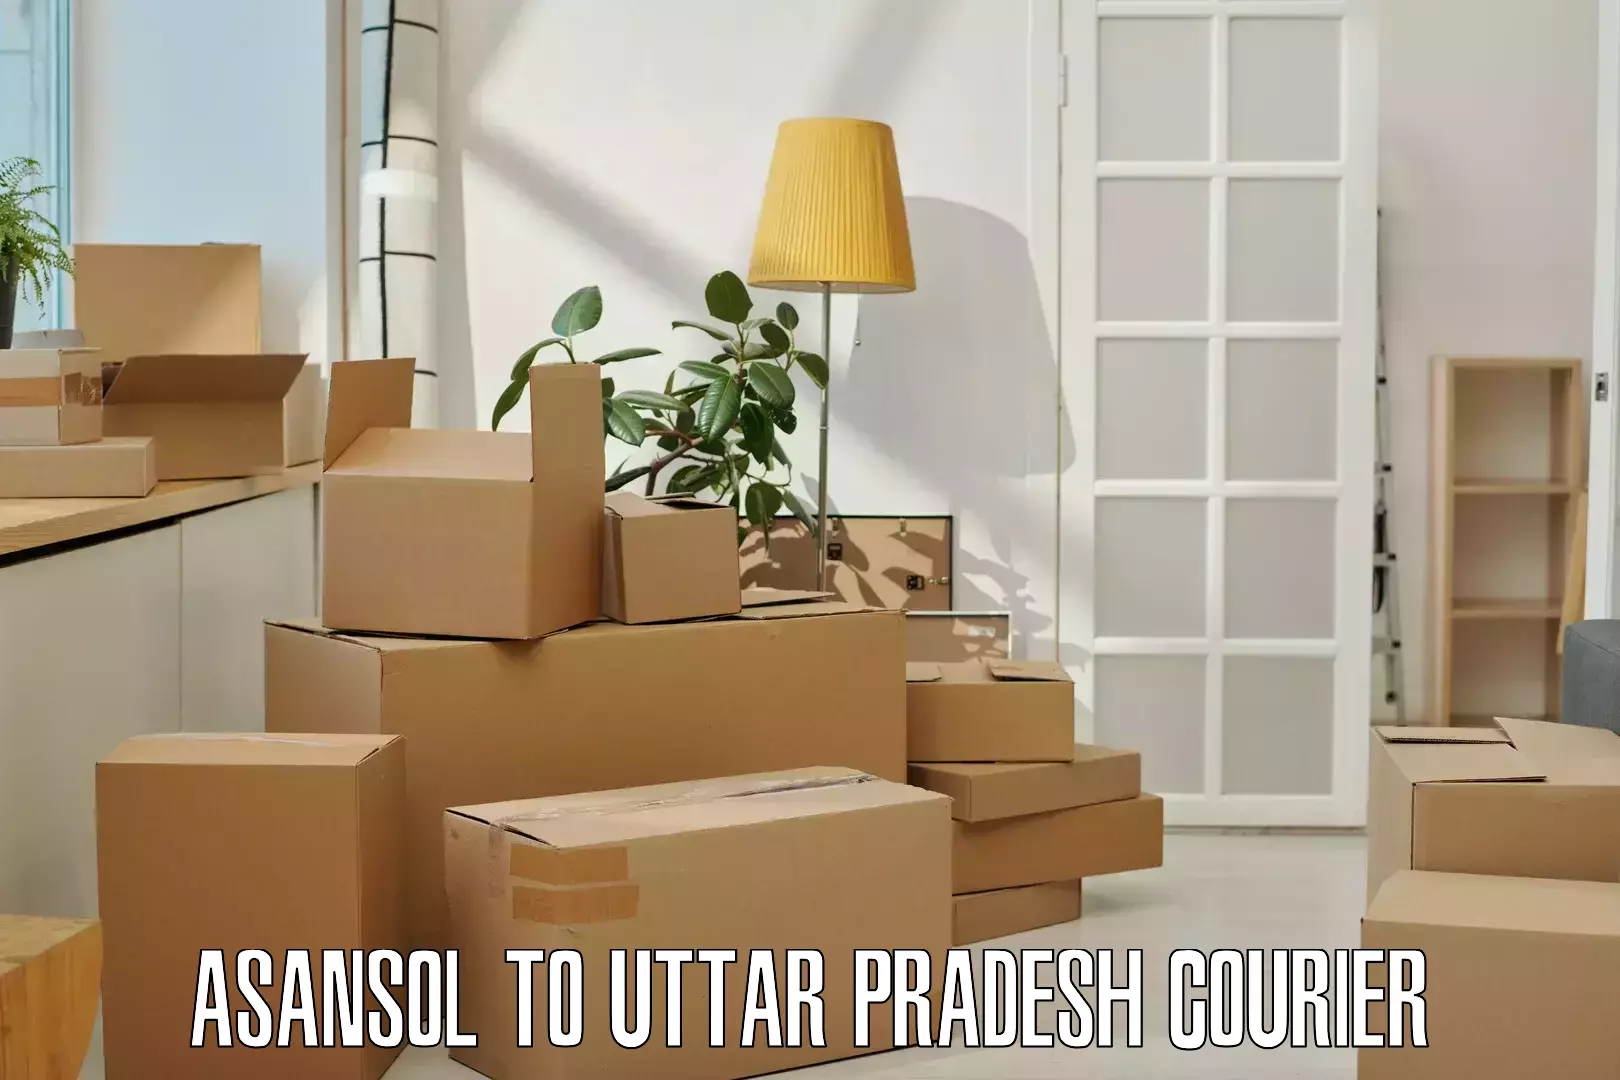 Express mail service Asansol to Agra